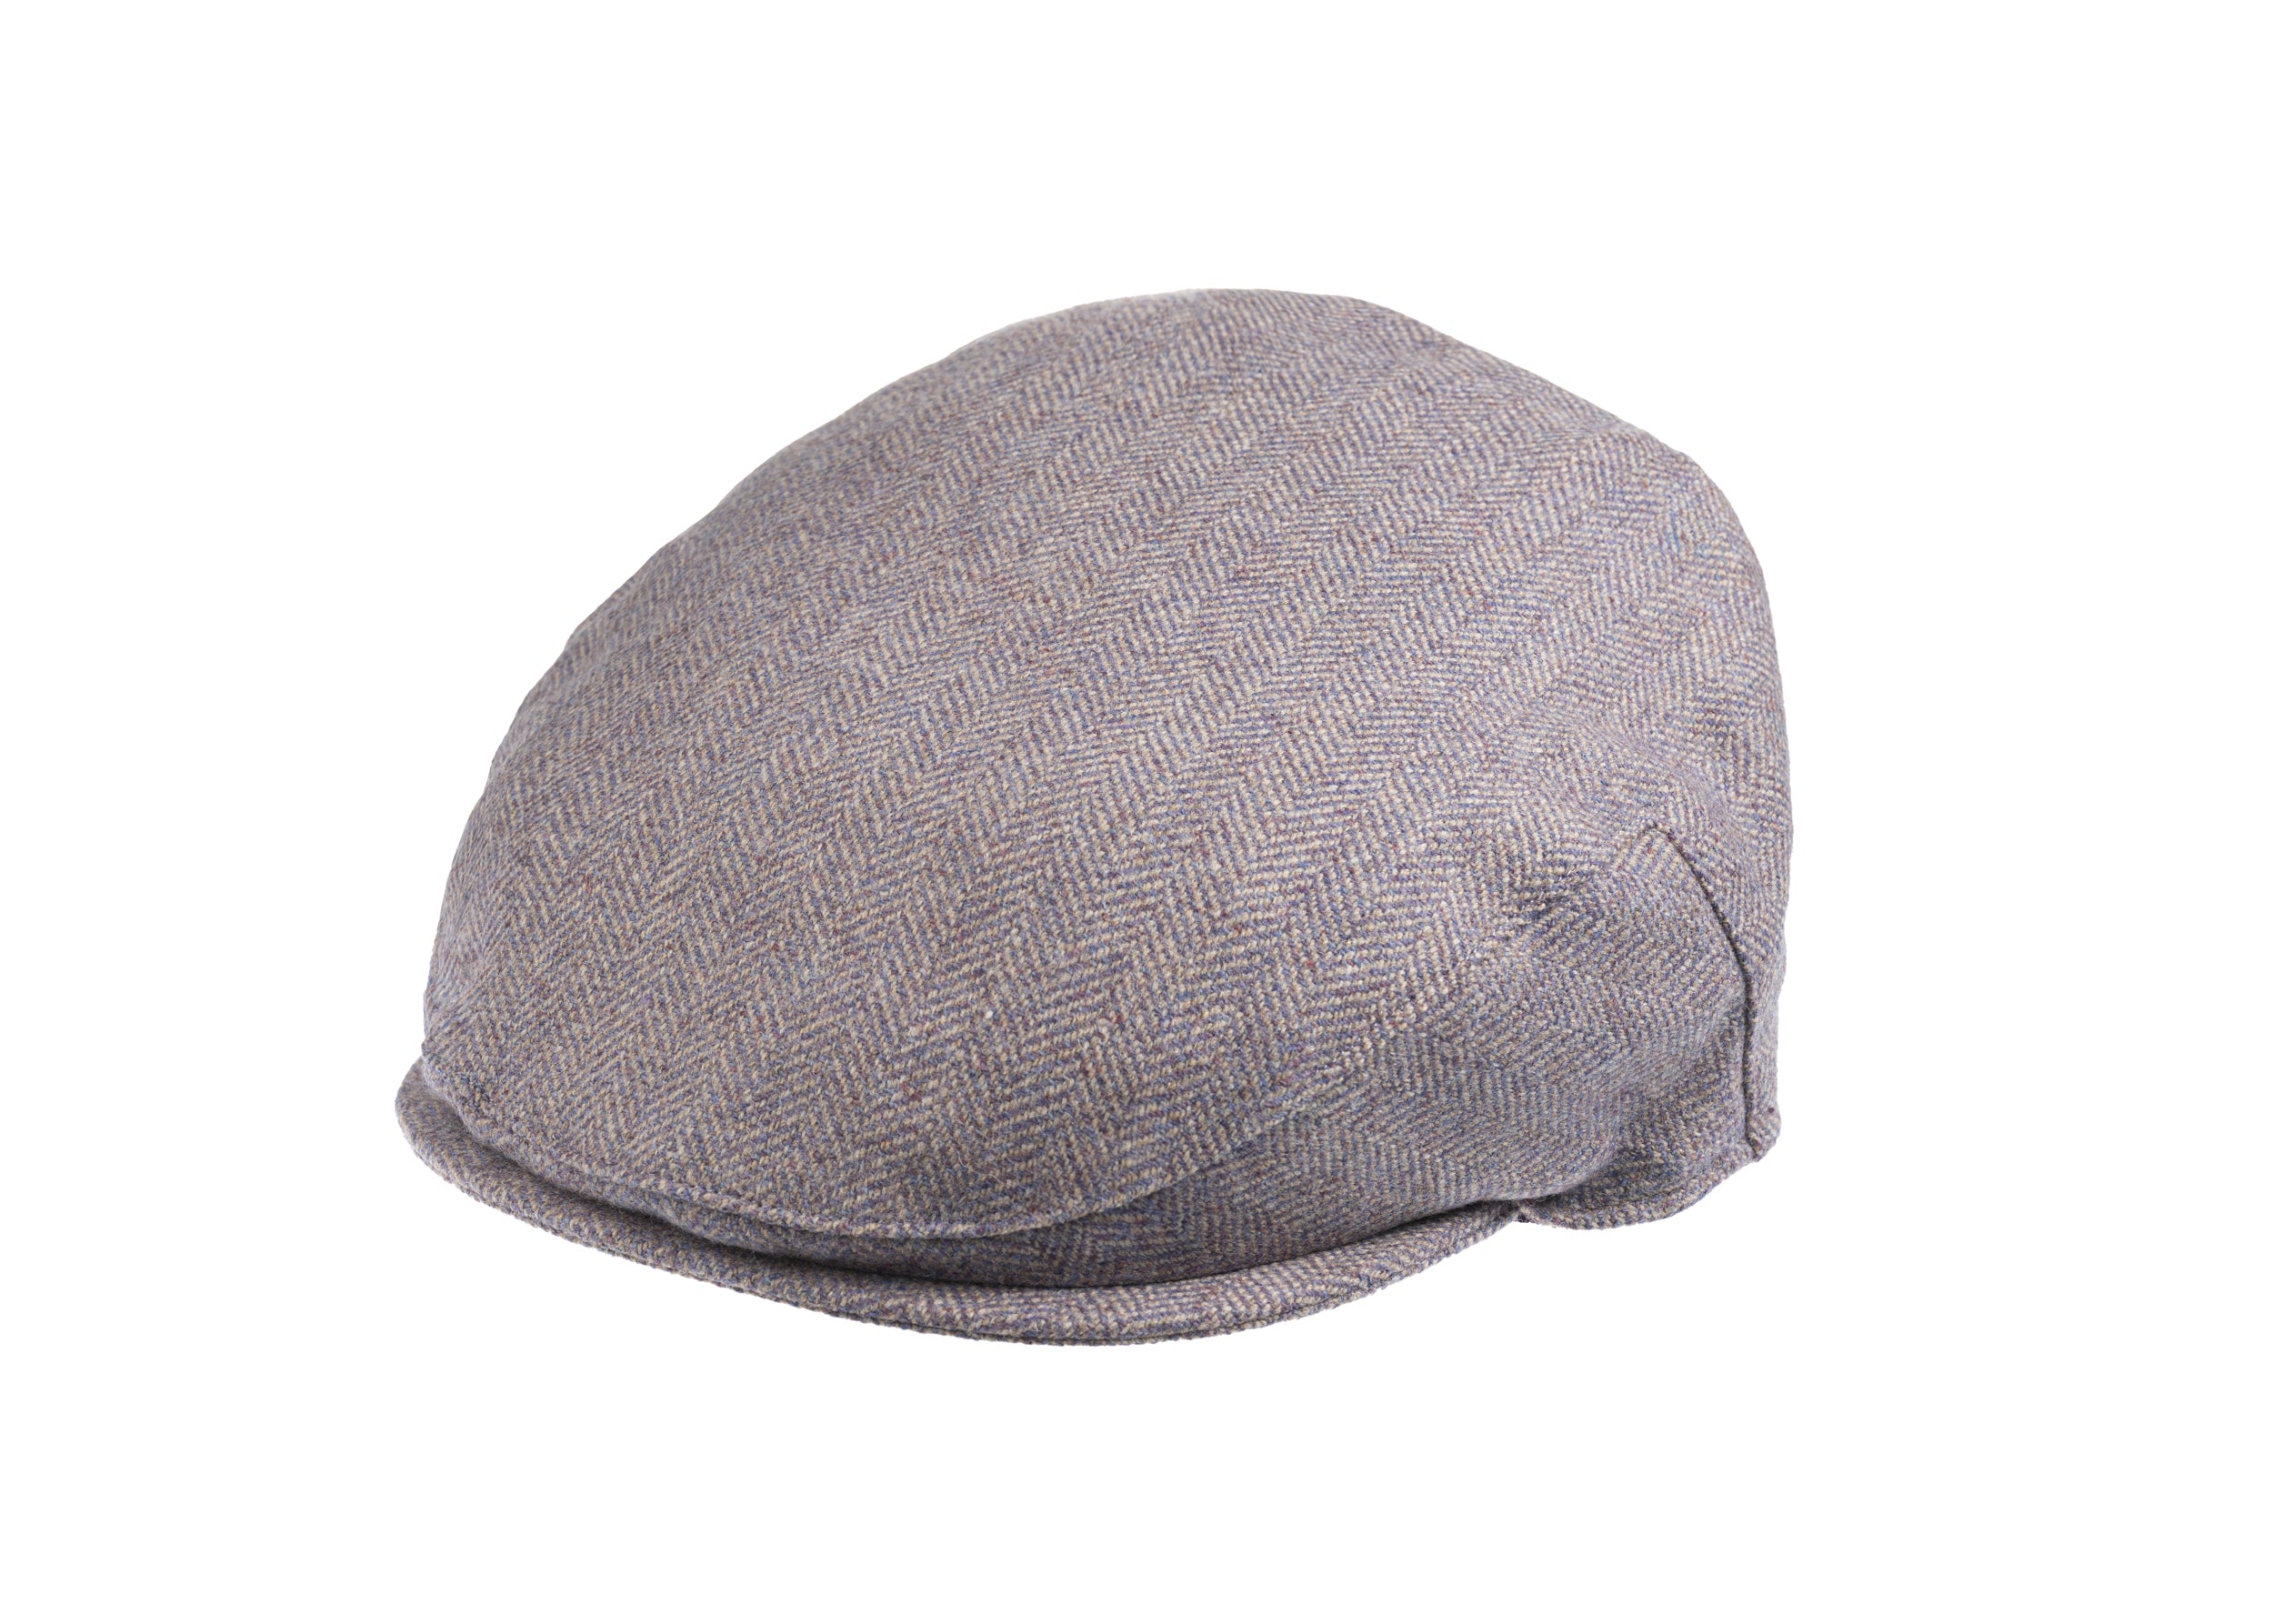 Lovat Mill Teviot Tweed Made in England Balmoral Cap in Heather